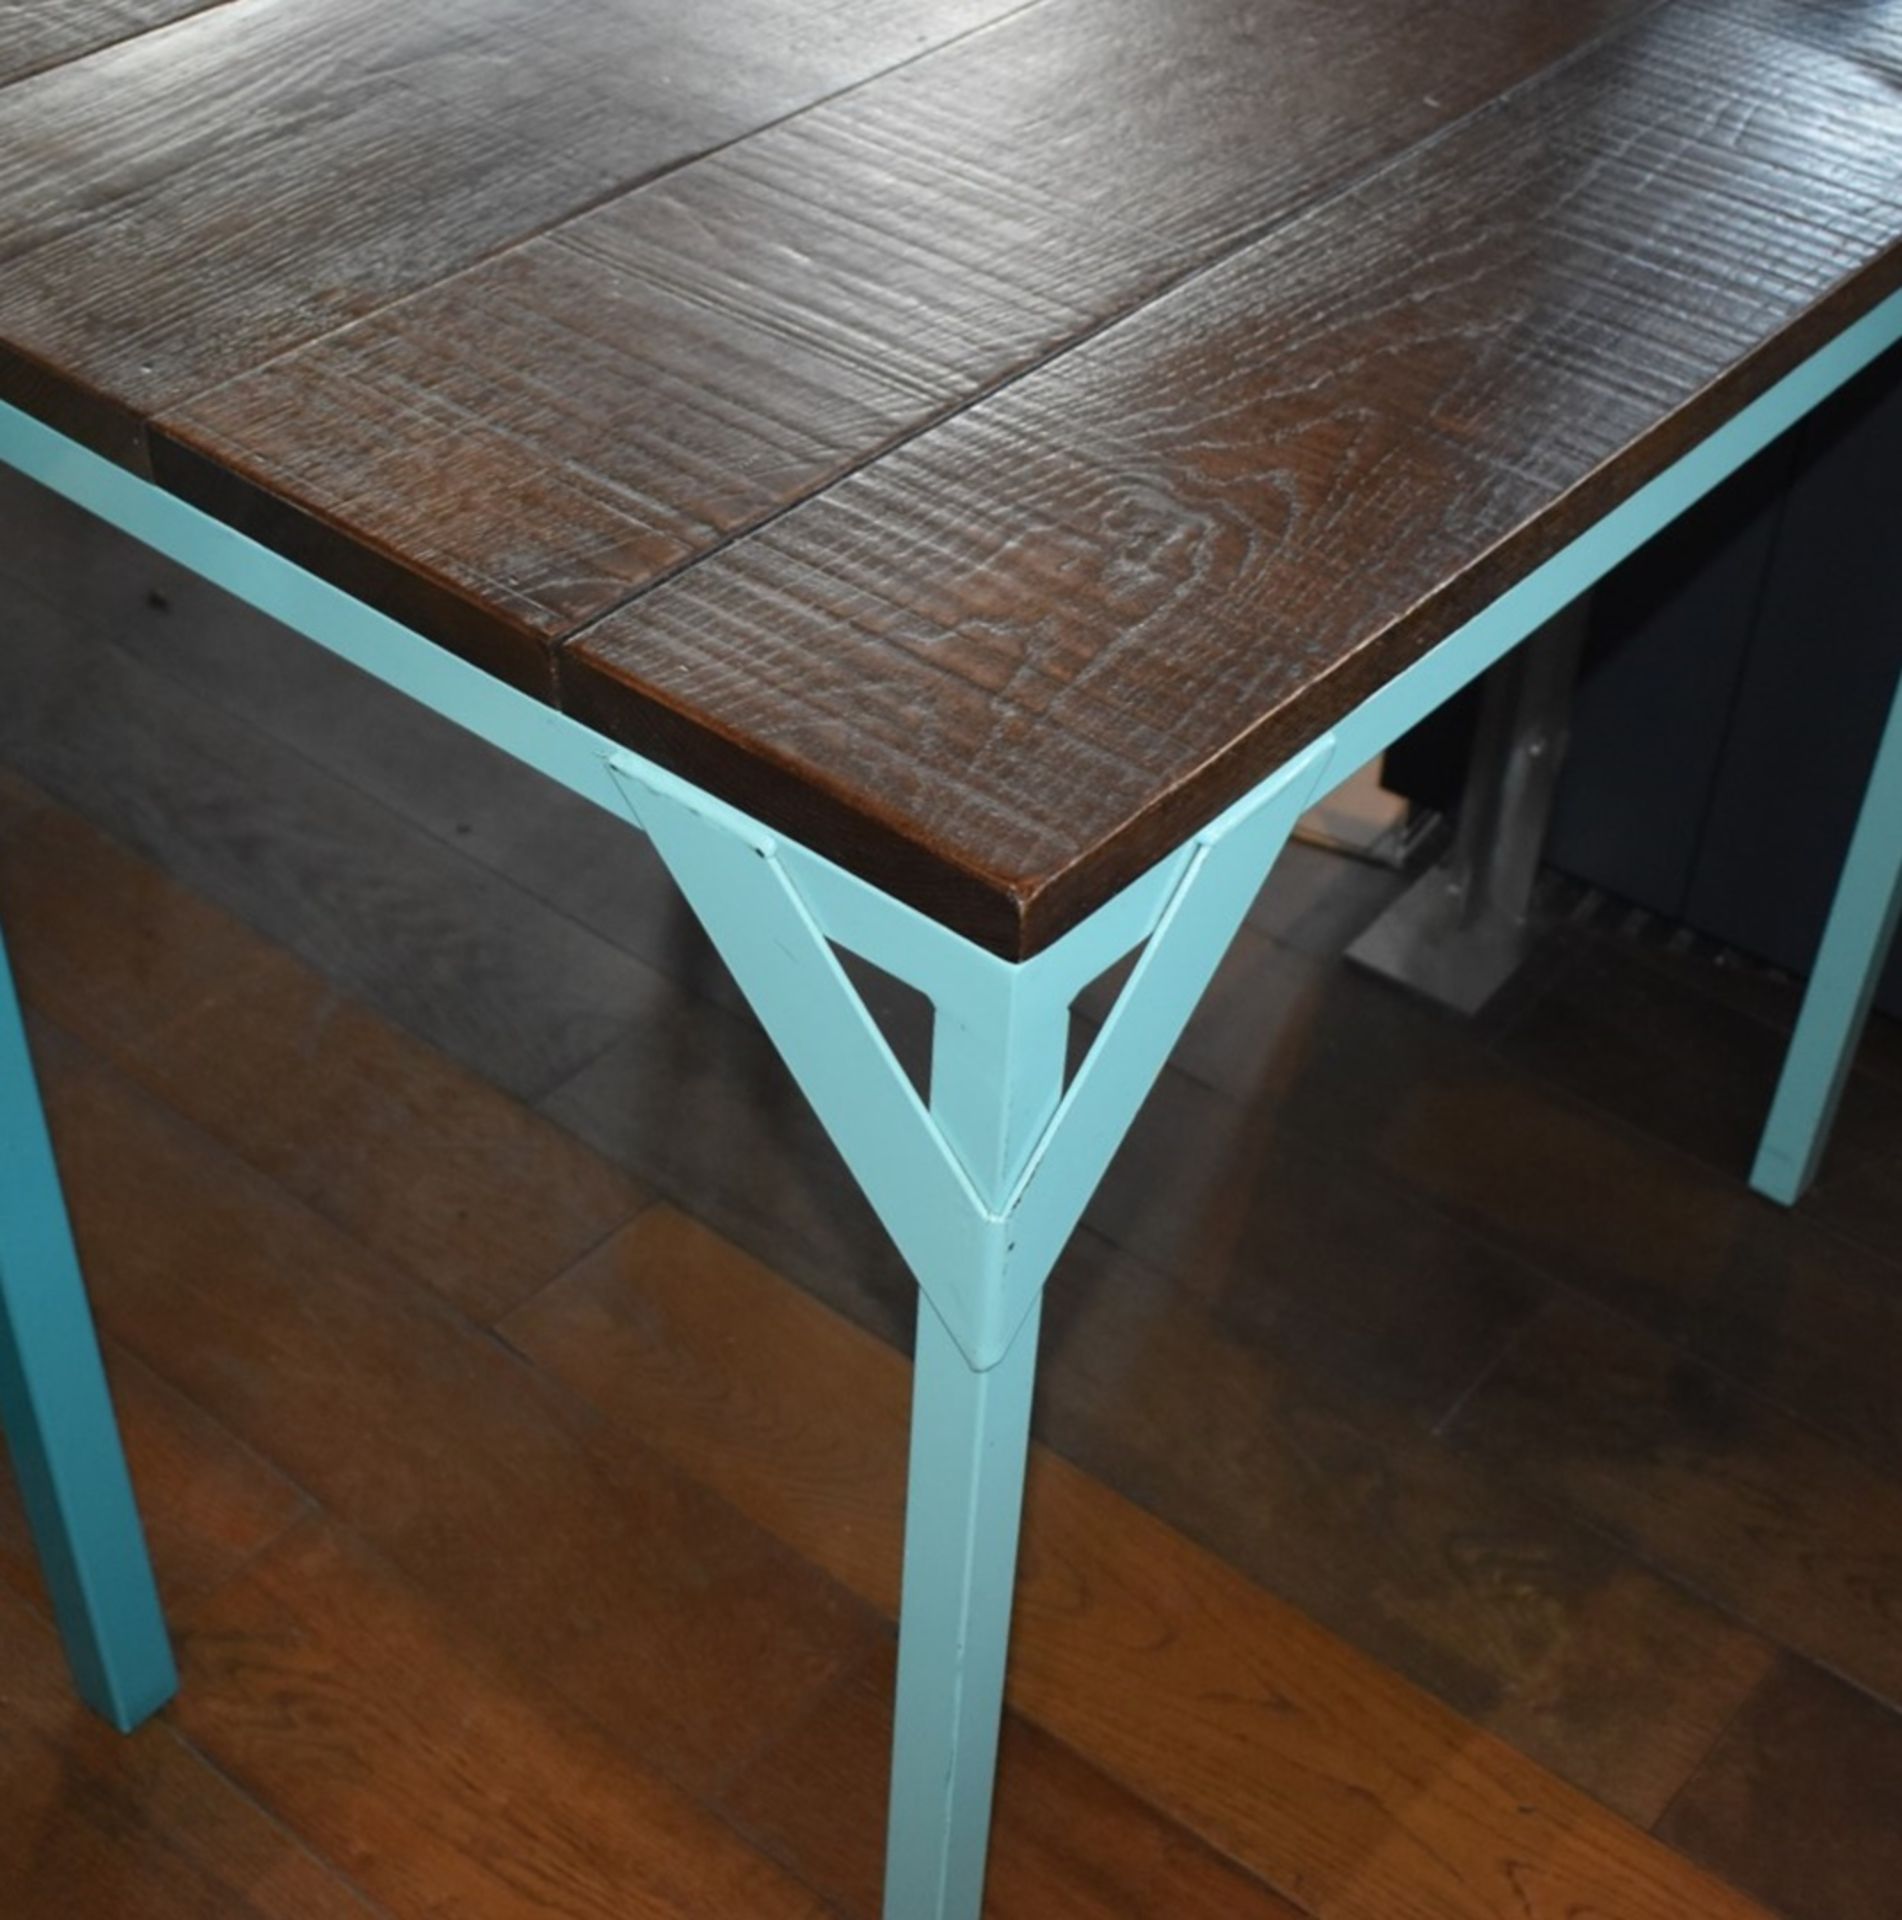 2 x Dining Tables With Duck Egg Blue Steel Bases and Wooden Panelled Tops - Size: H77  W85 x D85 cms - Image 3 of 4